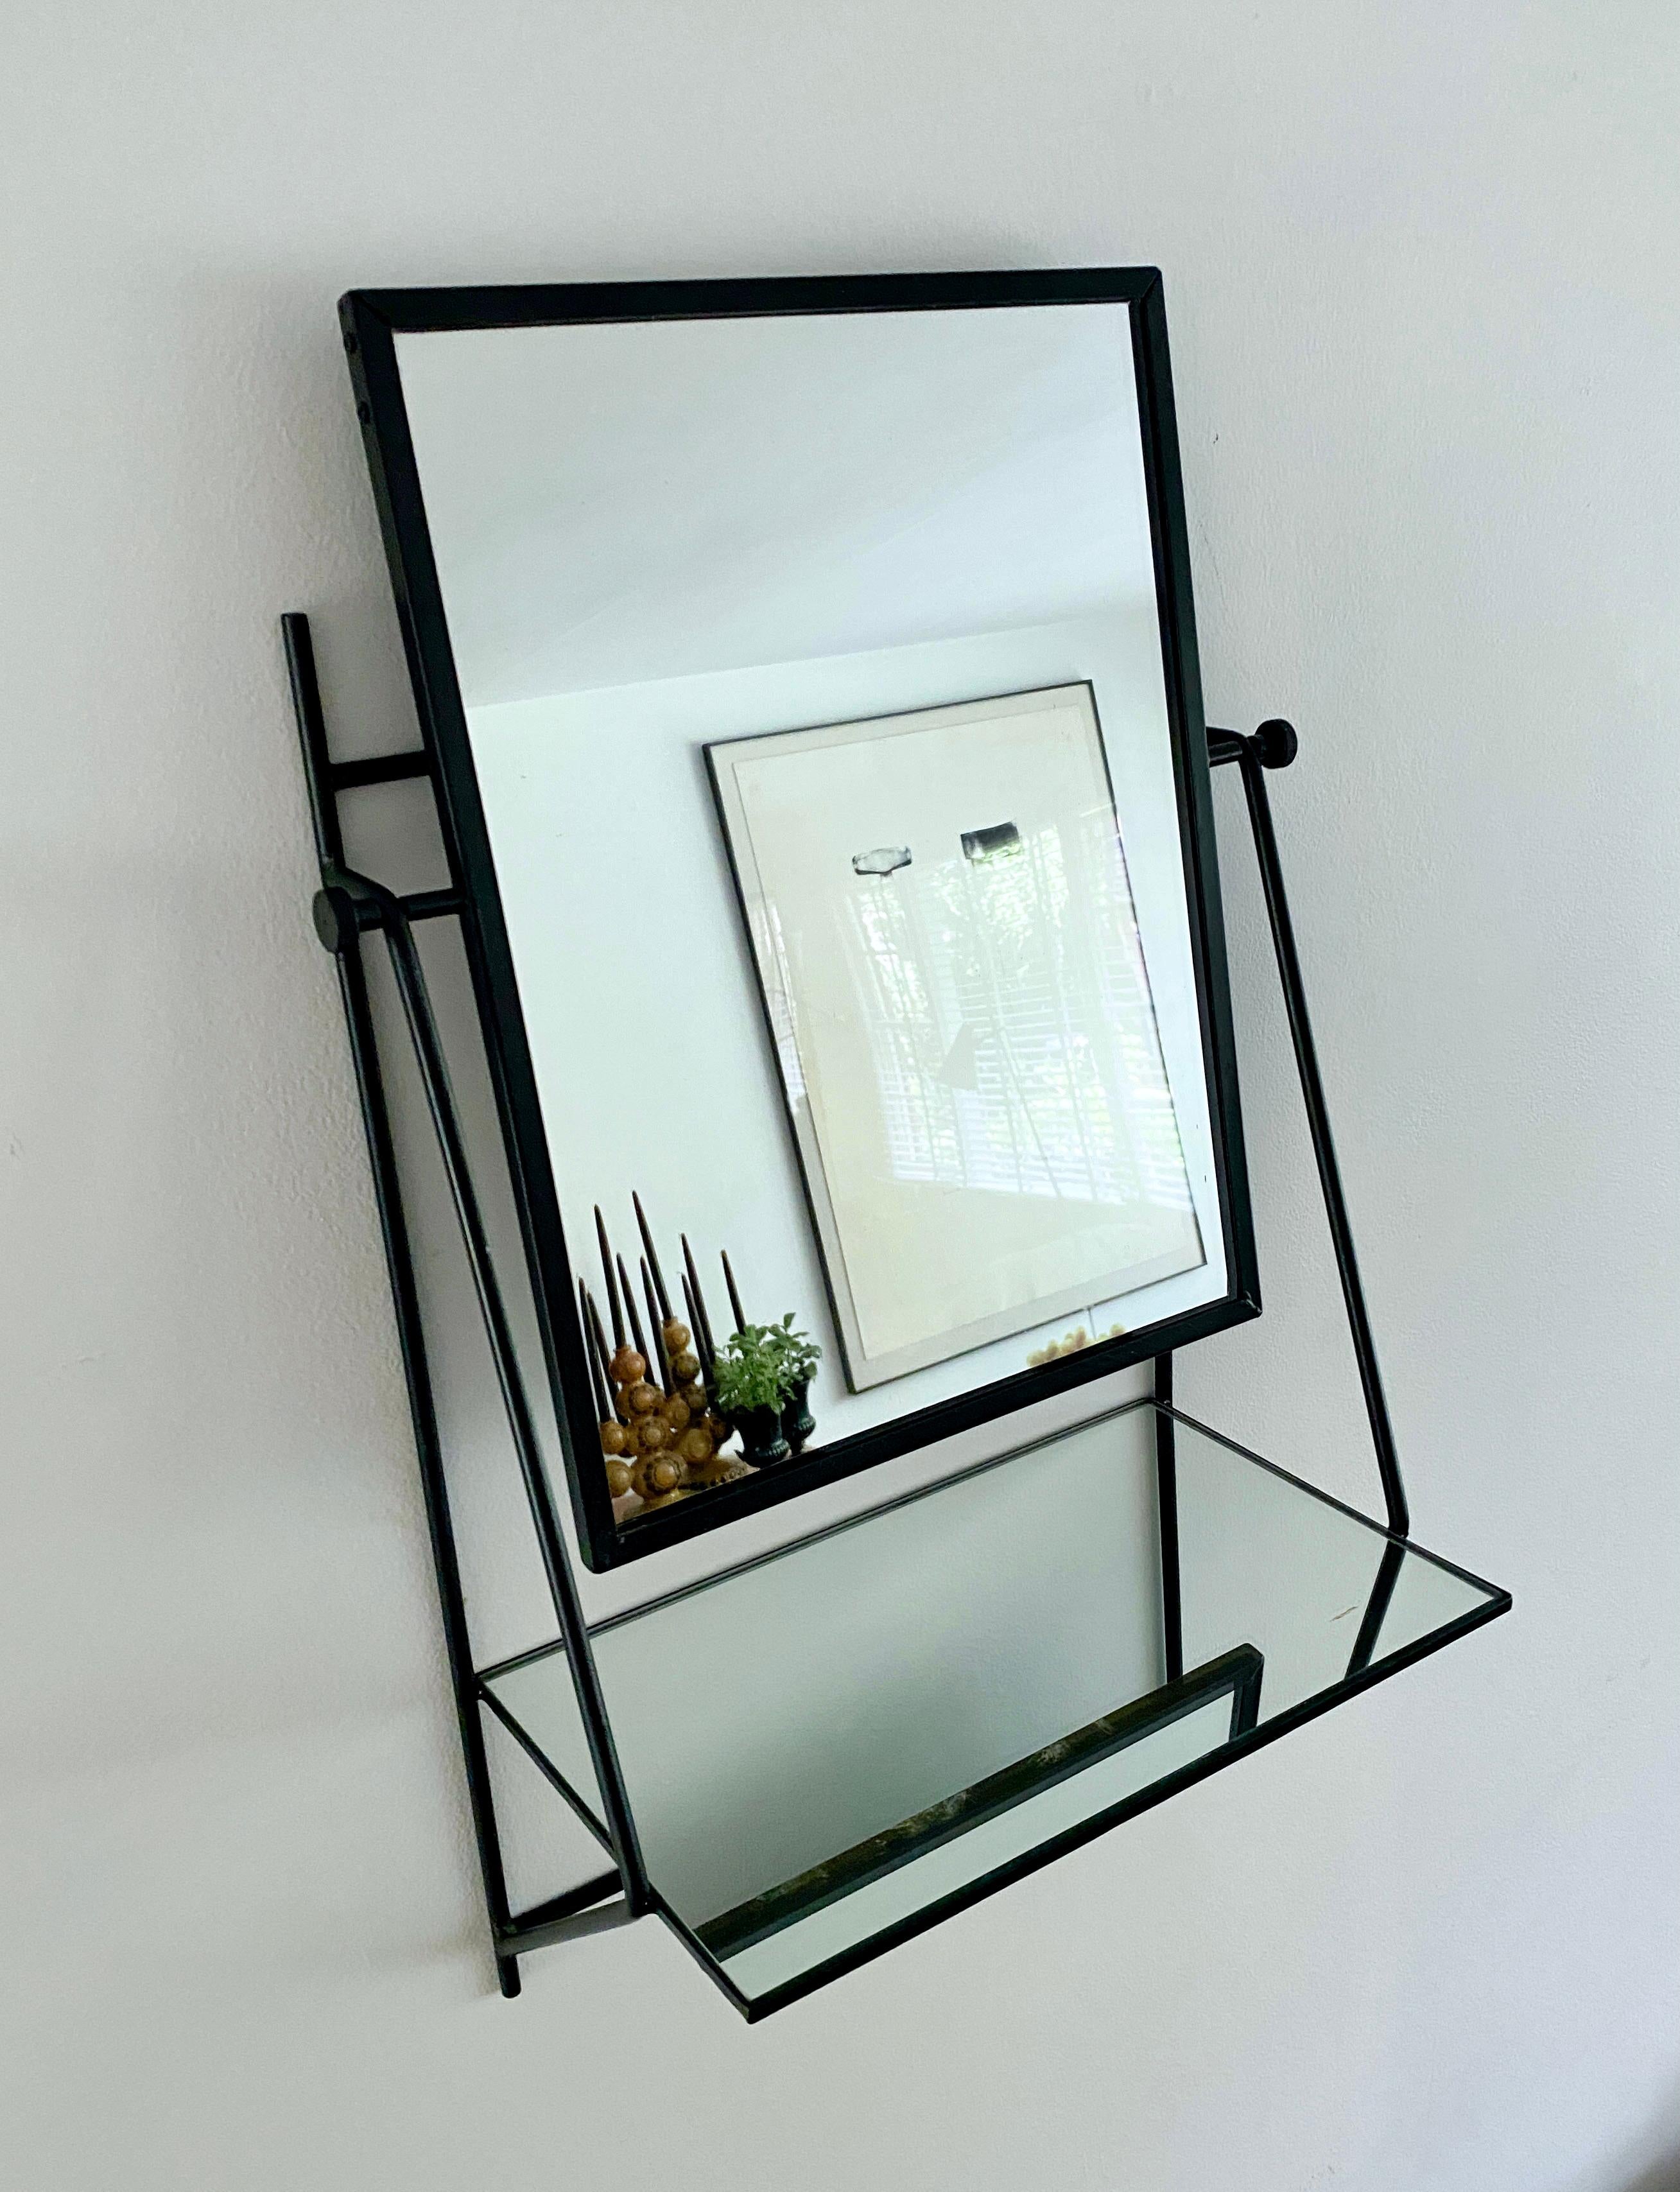 Paul McCobb Wall Mounted Mirror With Shelf For Bryce Originals In Good Condition For Sale In Doraville, GA